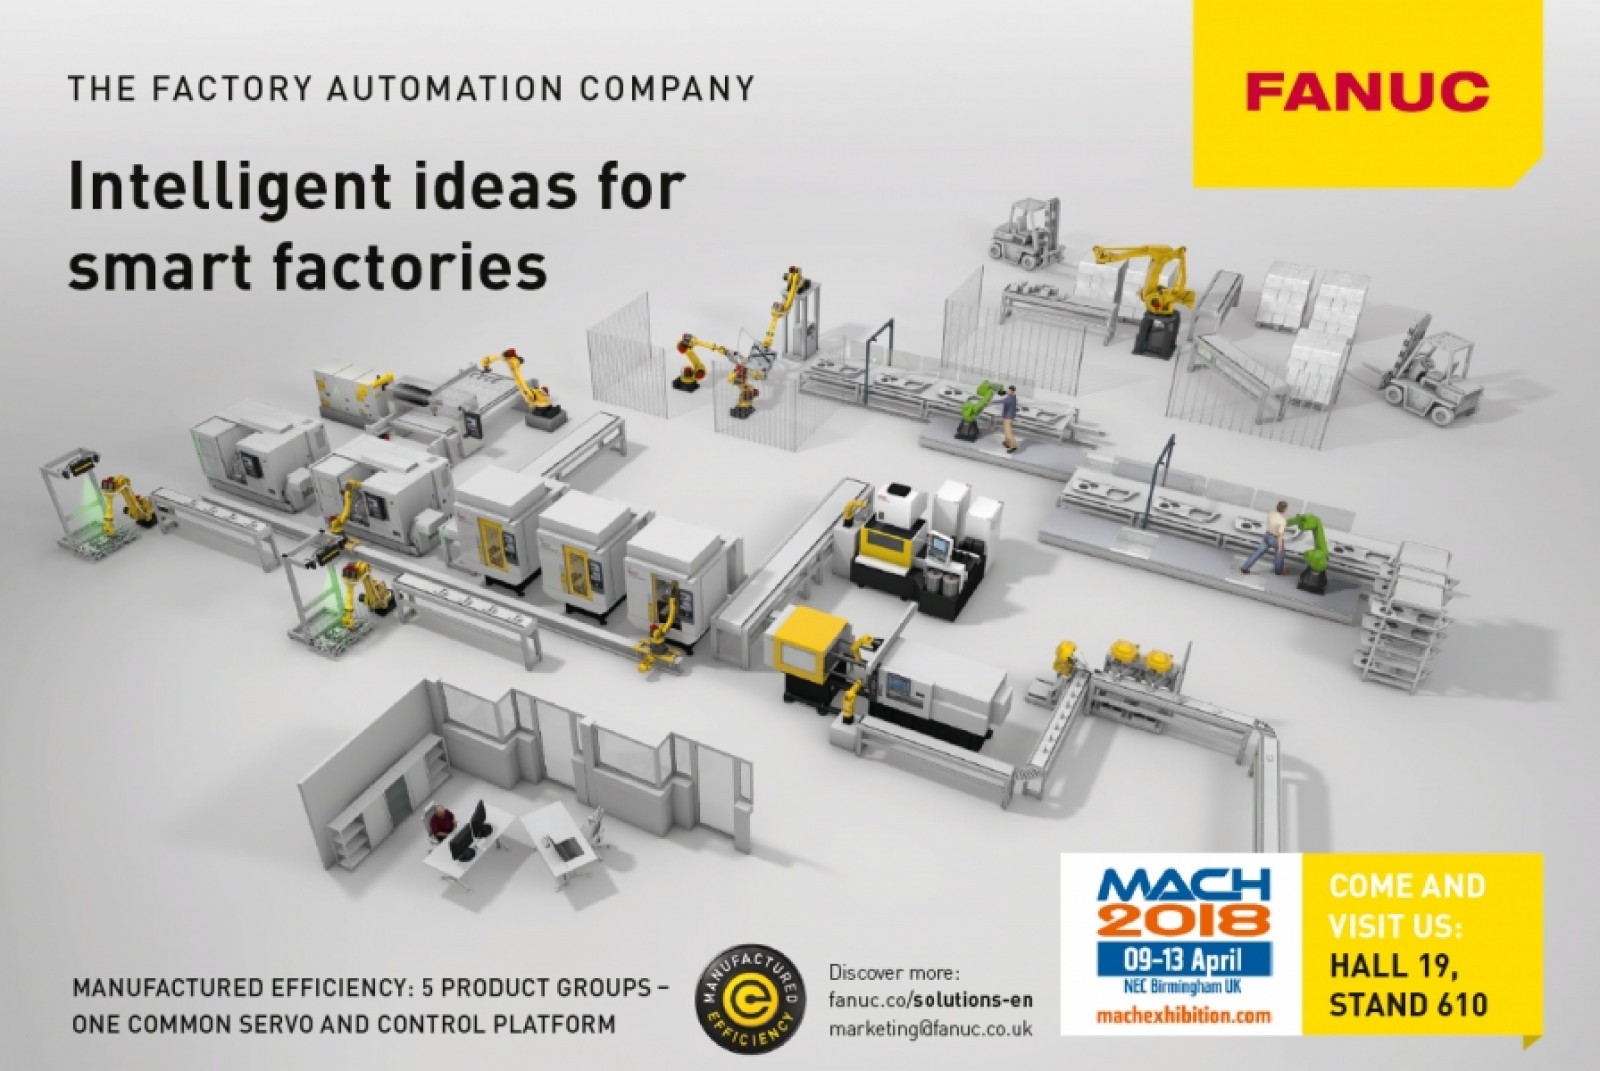 FANUC UK TO DEMONSTRATE OPEN NETWORK CAPABILITIES AT MACH 2018